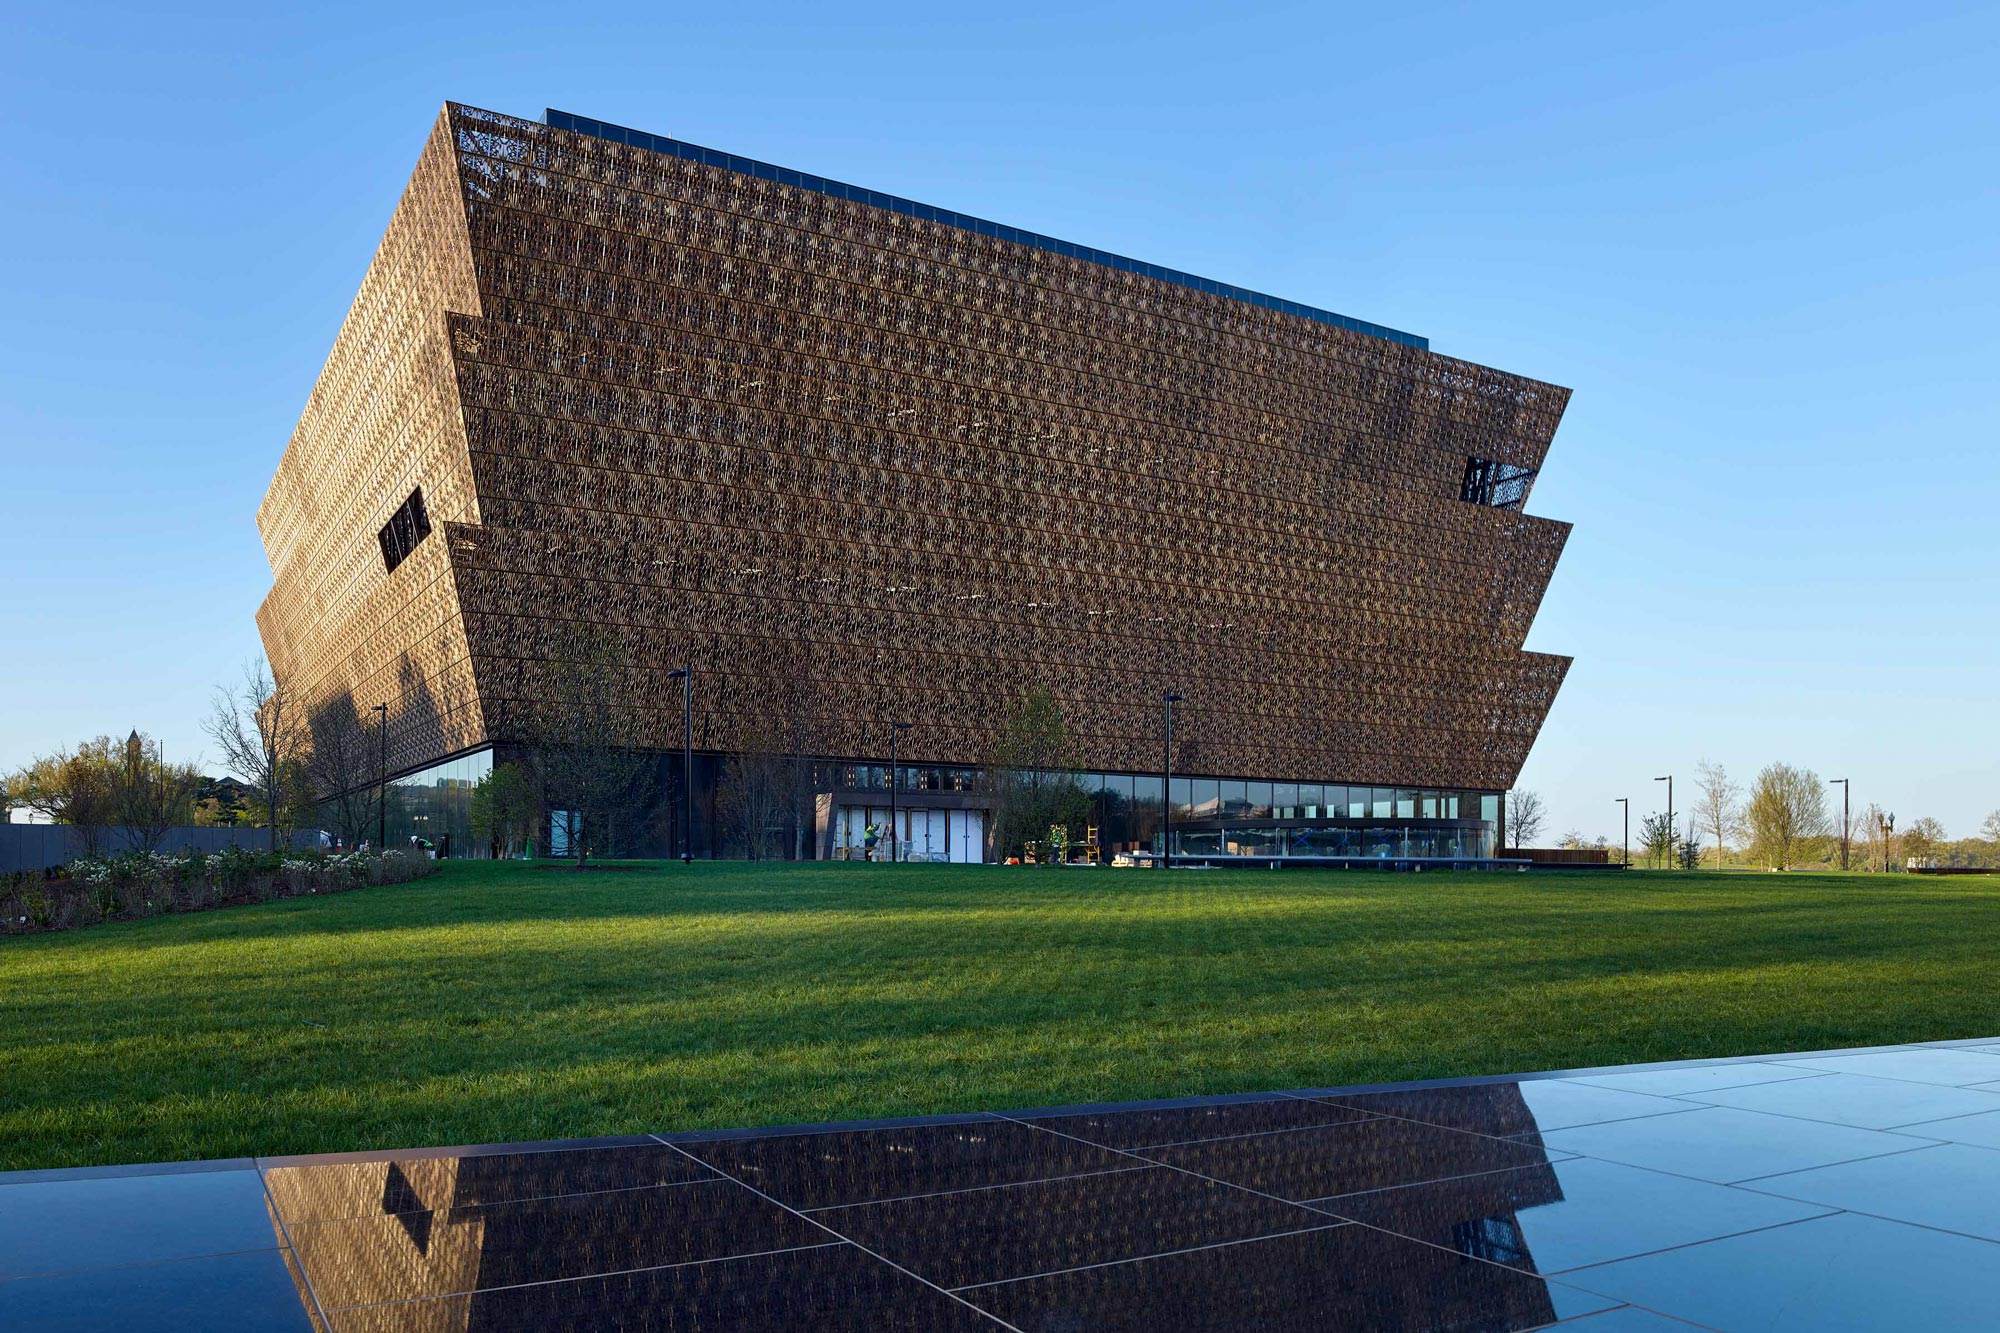 Tall brown building known as The National Museum of African American History